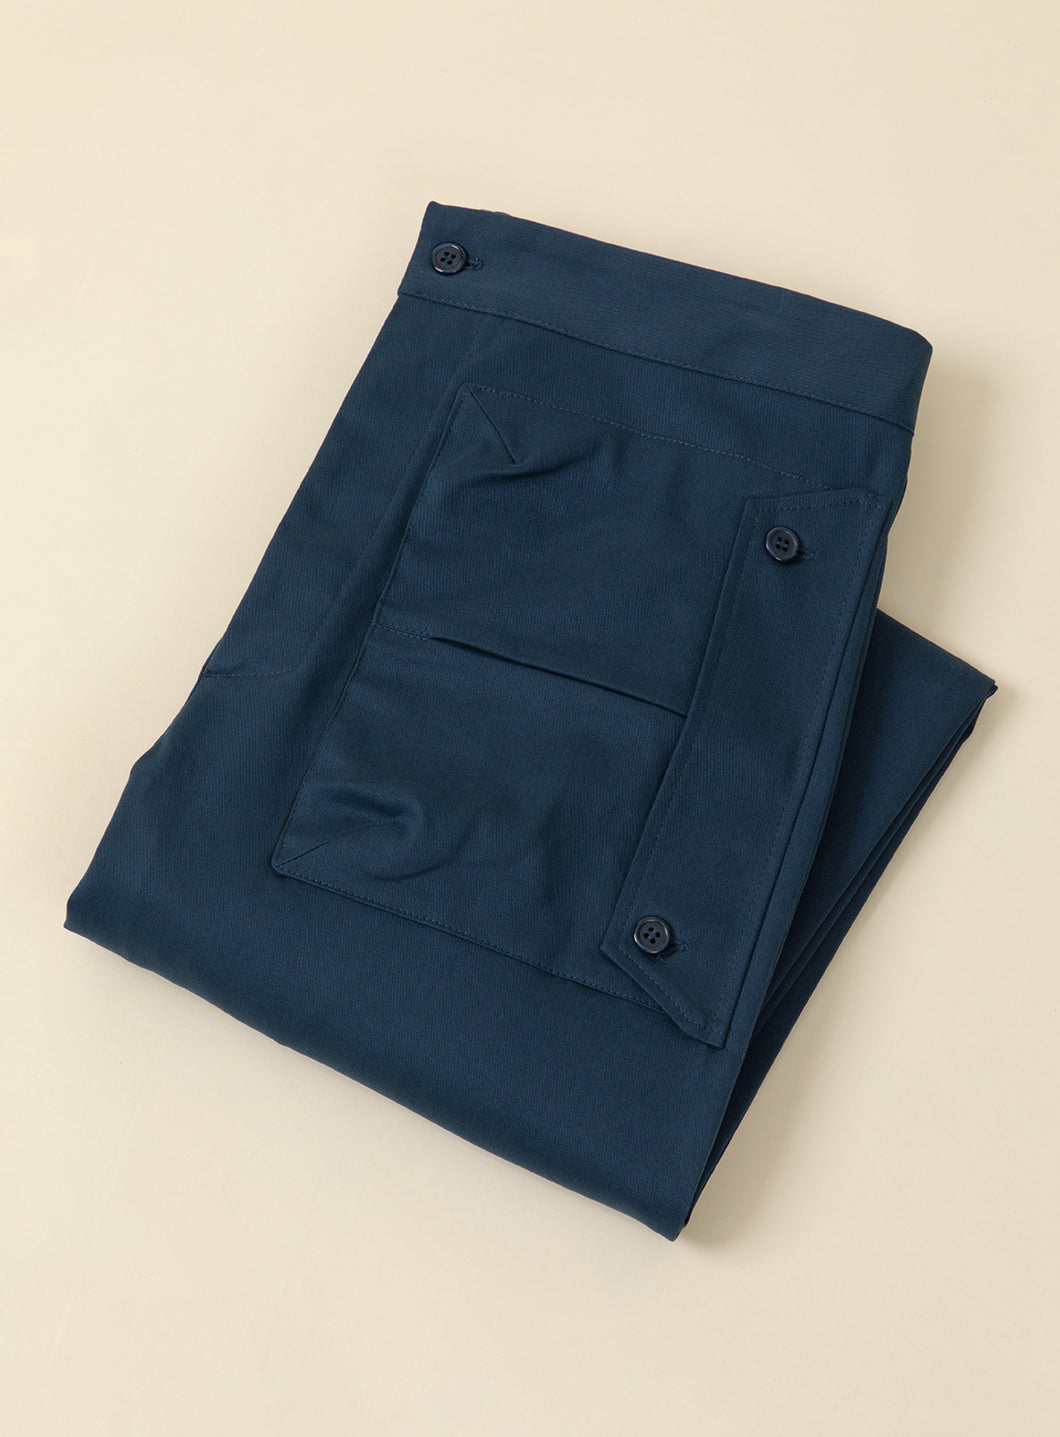 Pants with Envelope Pockets in Petrol Blue Satin Cotton